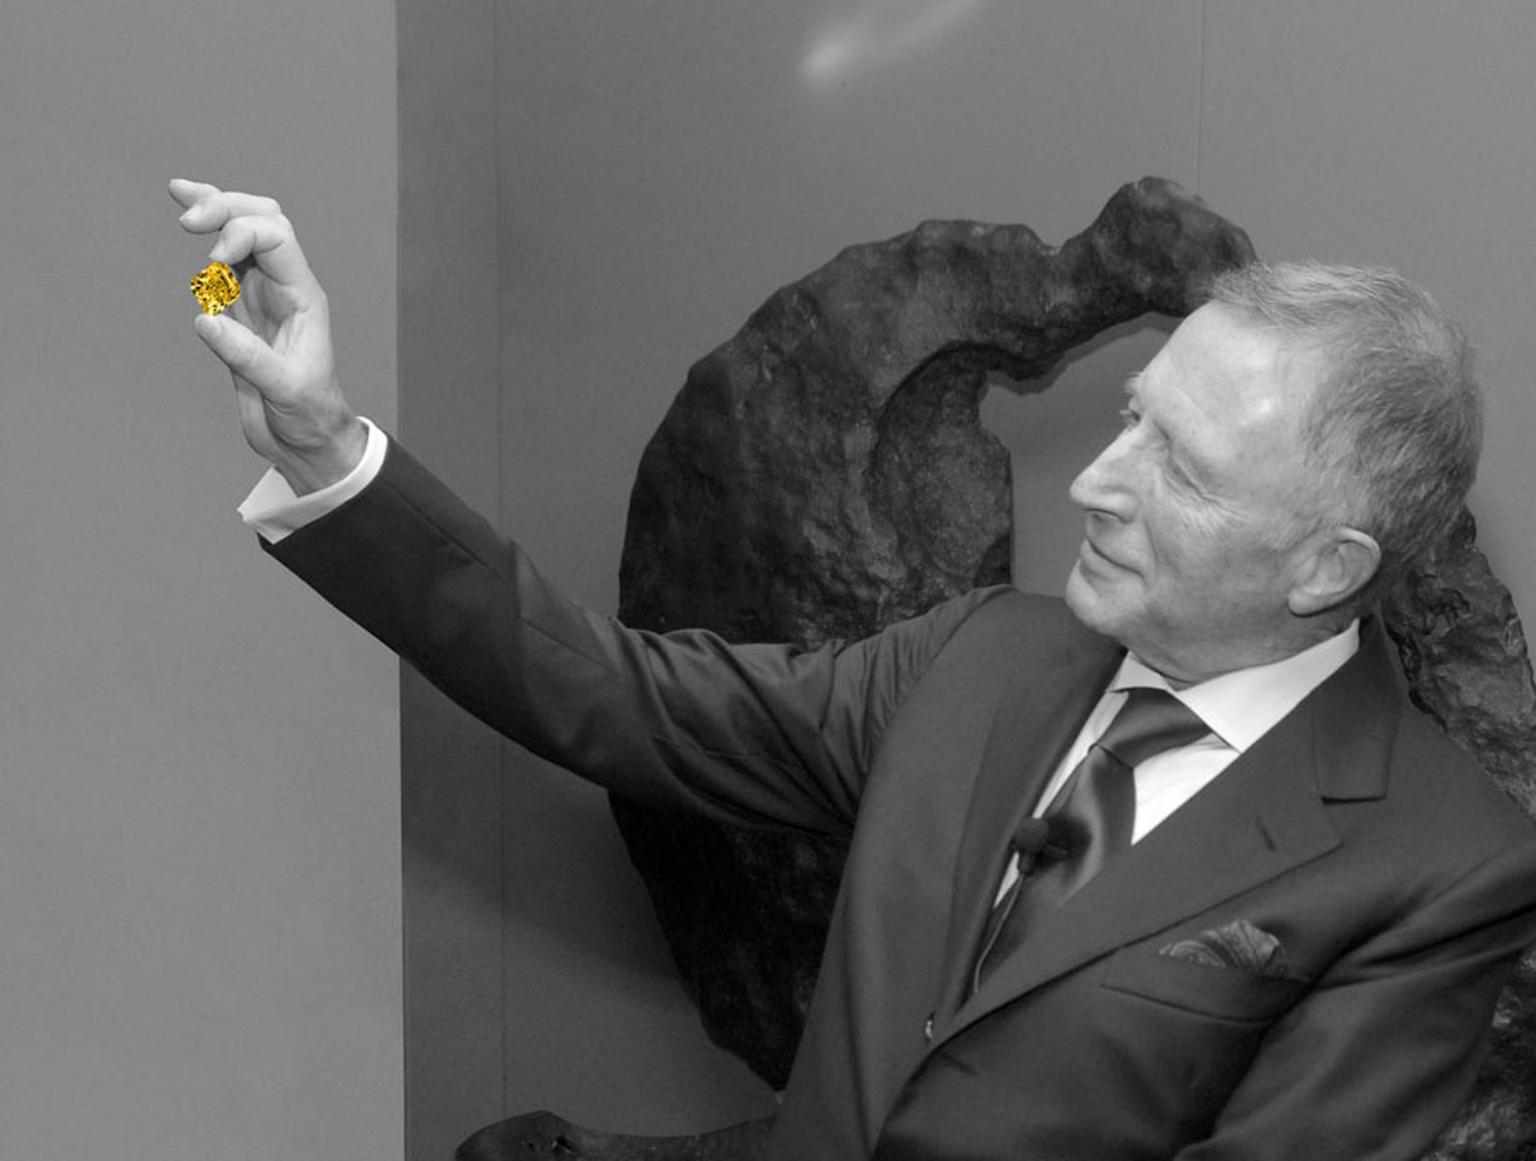 On 21 April 2014, Graff Diamonds received a coveted Queen's Award, less than a year after chairman Lawrence Graff, pictured, was awarded an OBE for his services to jewellery